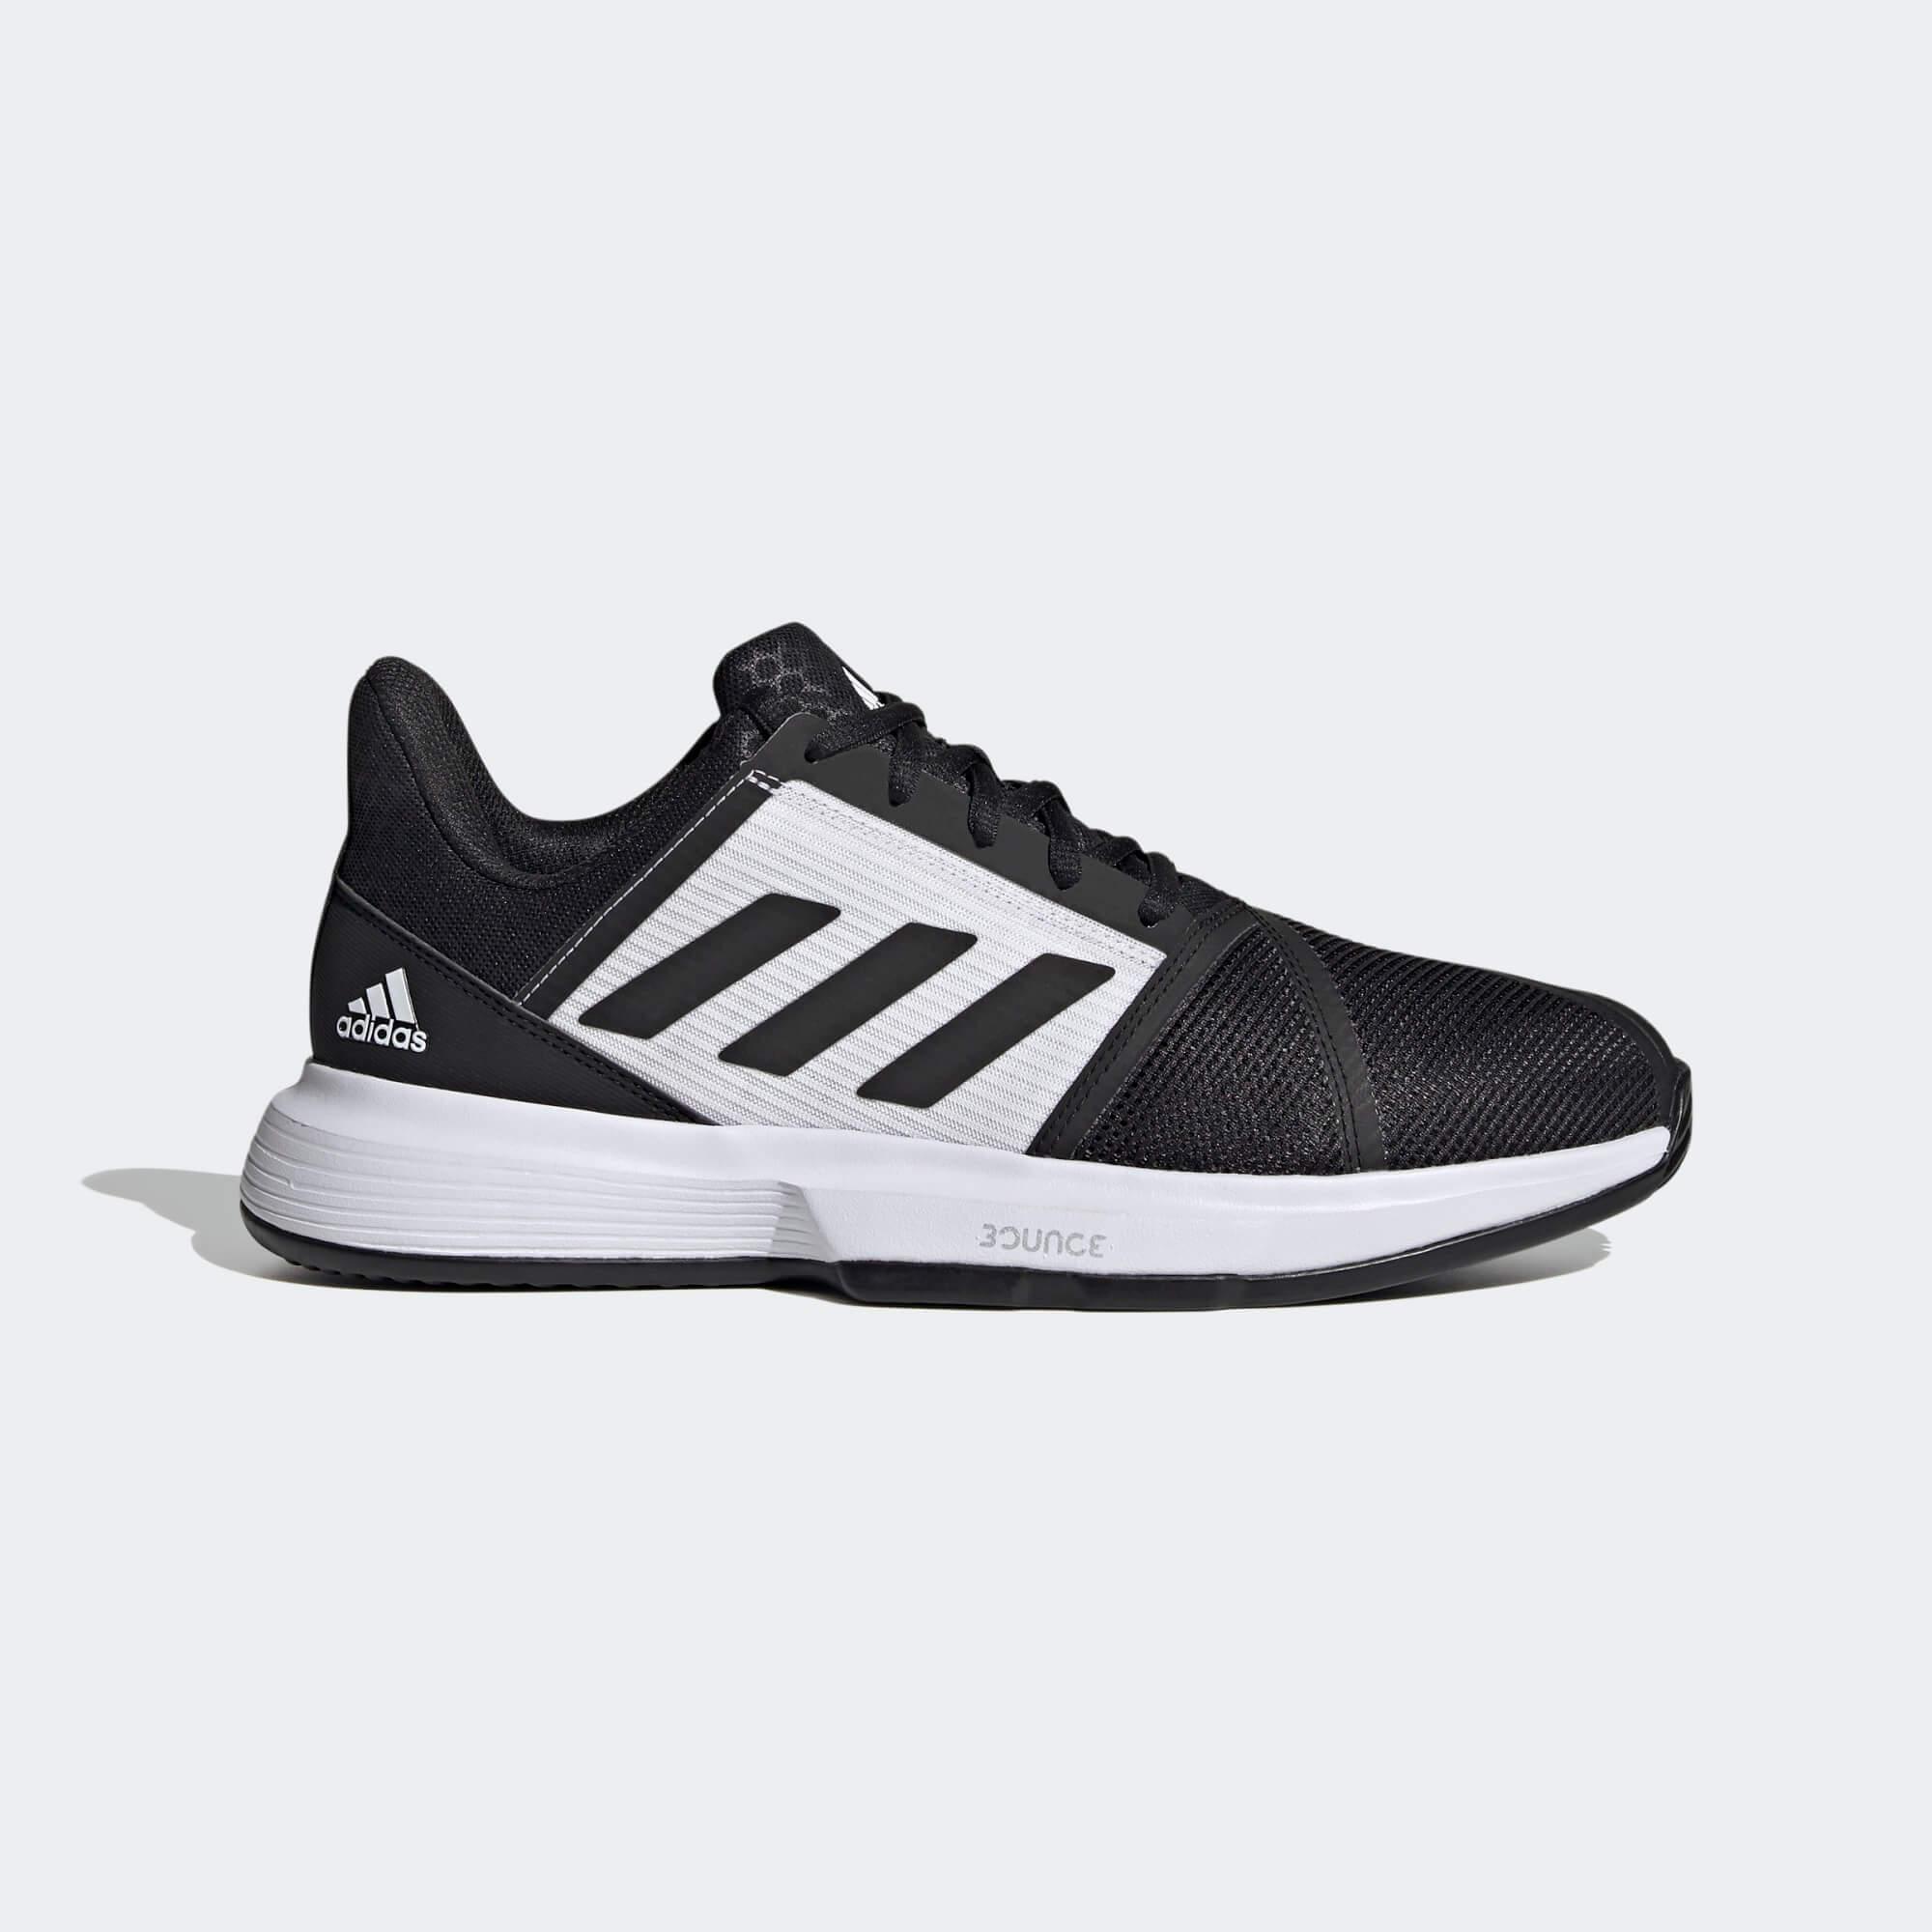 Adidas Mens CourtJam Bounce Clay Tennis Shoes - Black/White